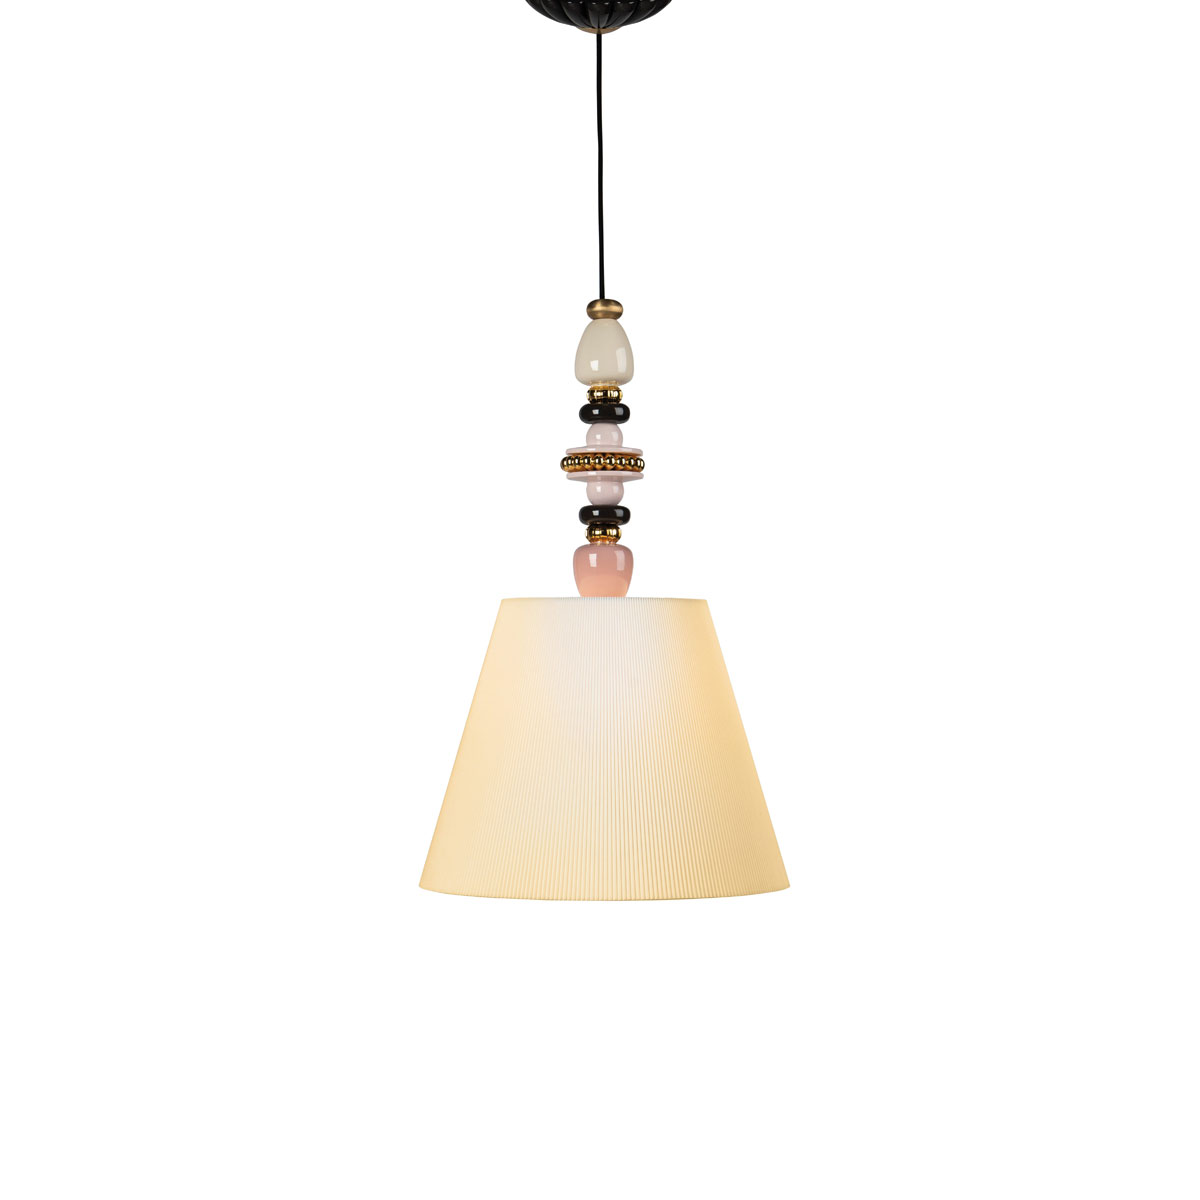 Lladro Modern Lighting, Firefly Ceiling Lamp. Pink And Golden Luster.